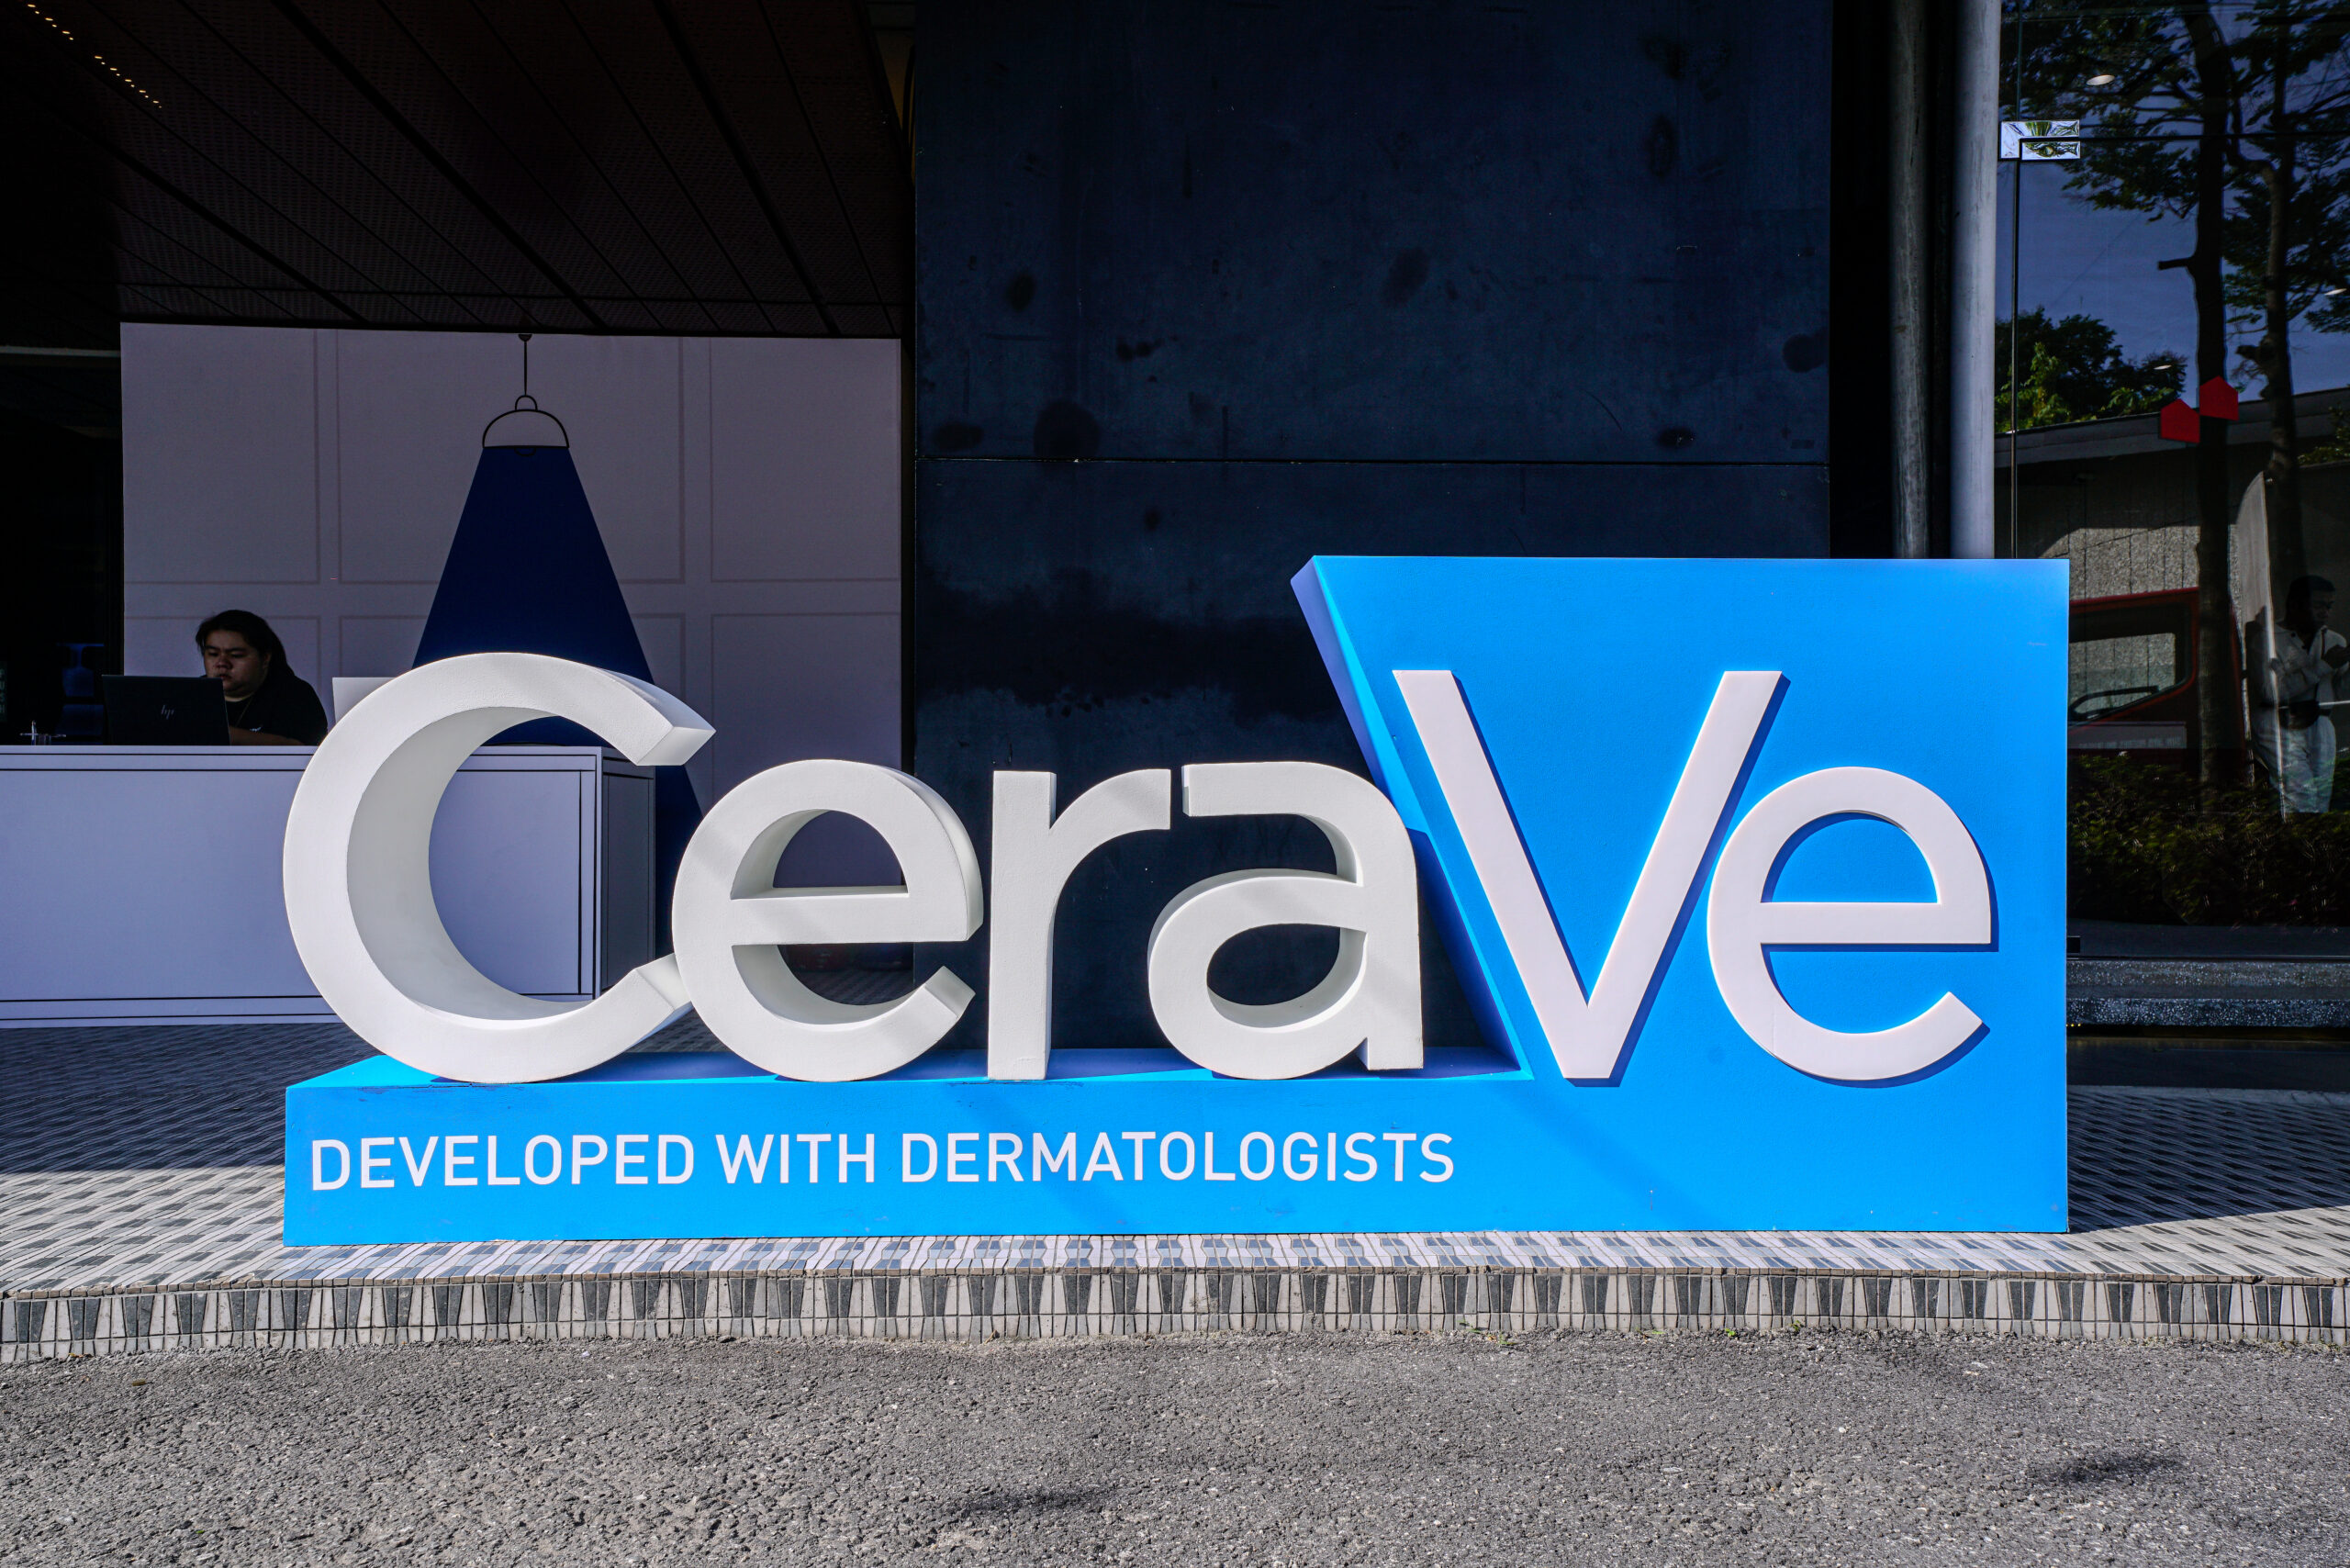 Cerave at bookmark, apw